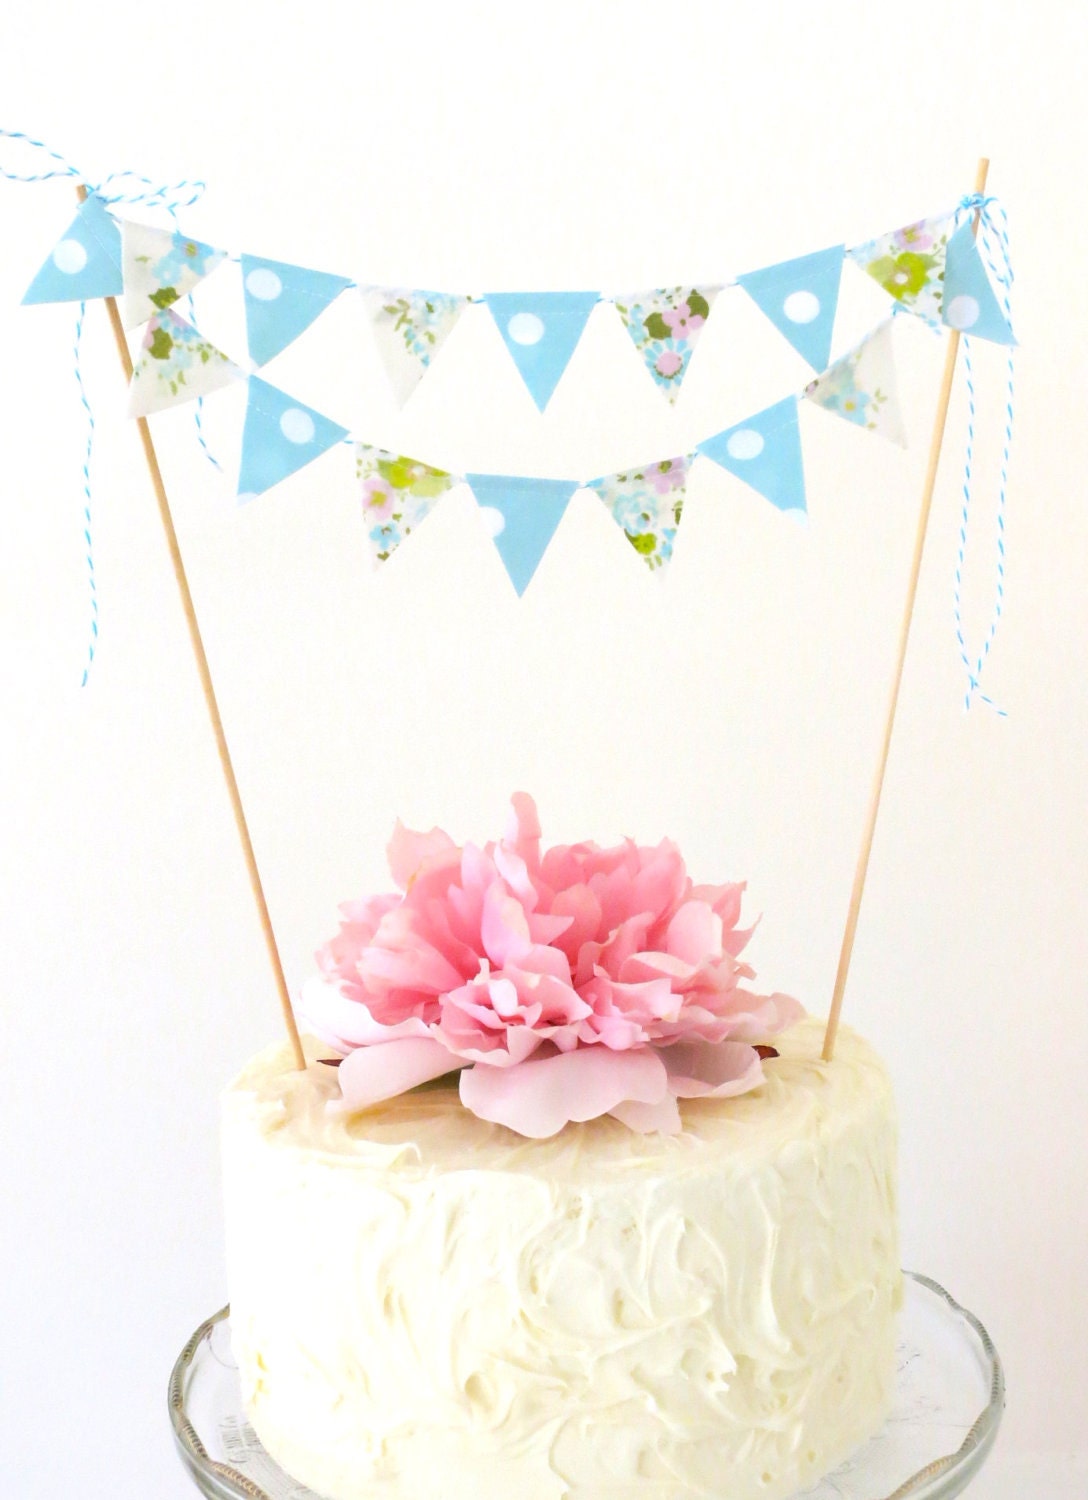 Cake Bunting- "Forget Me Not"